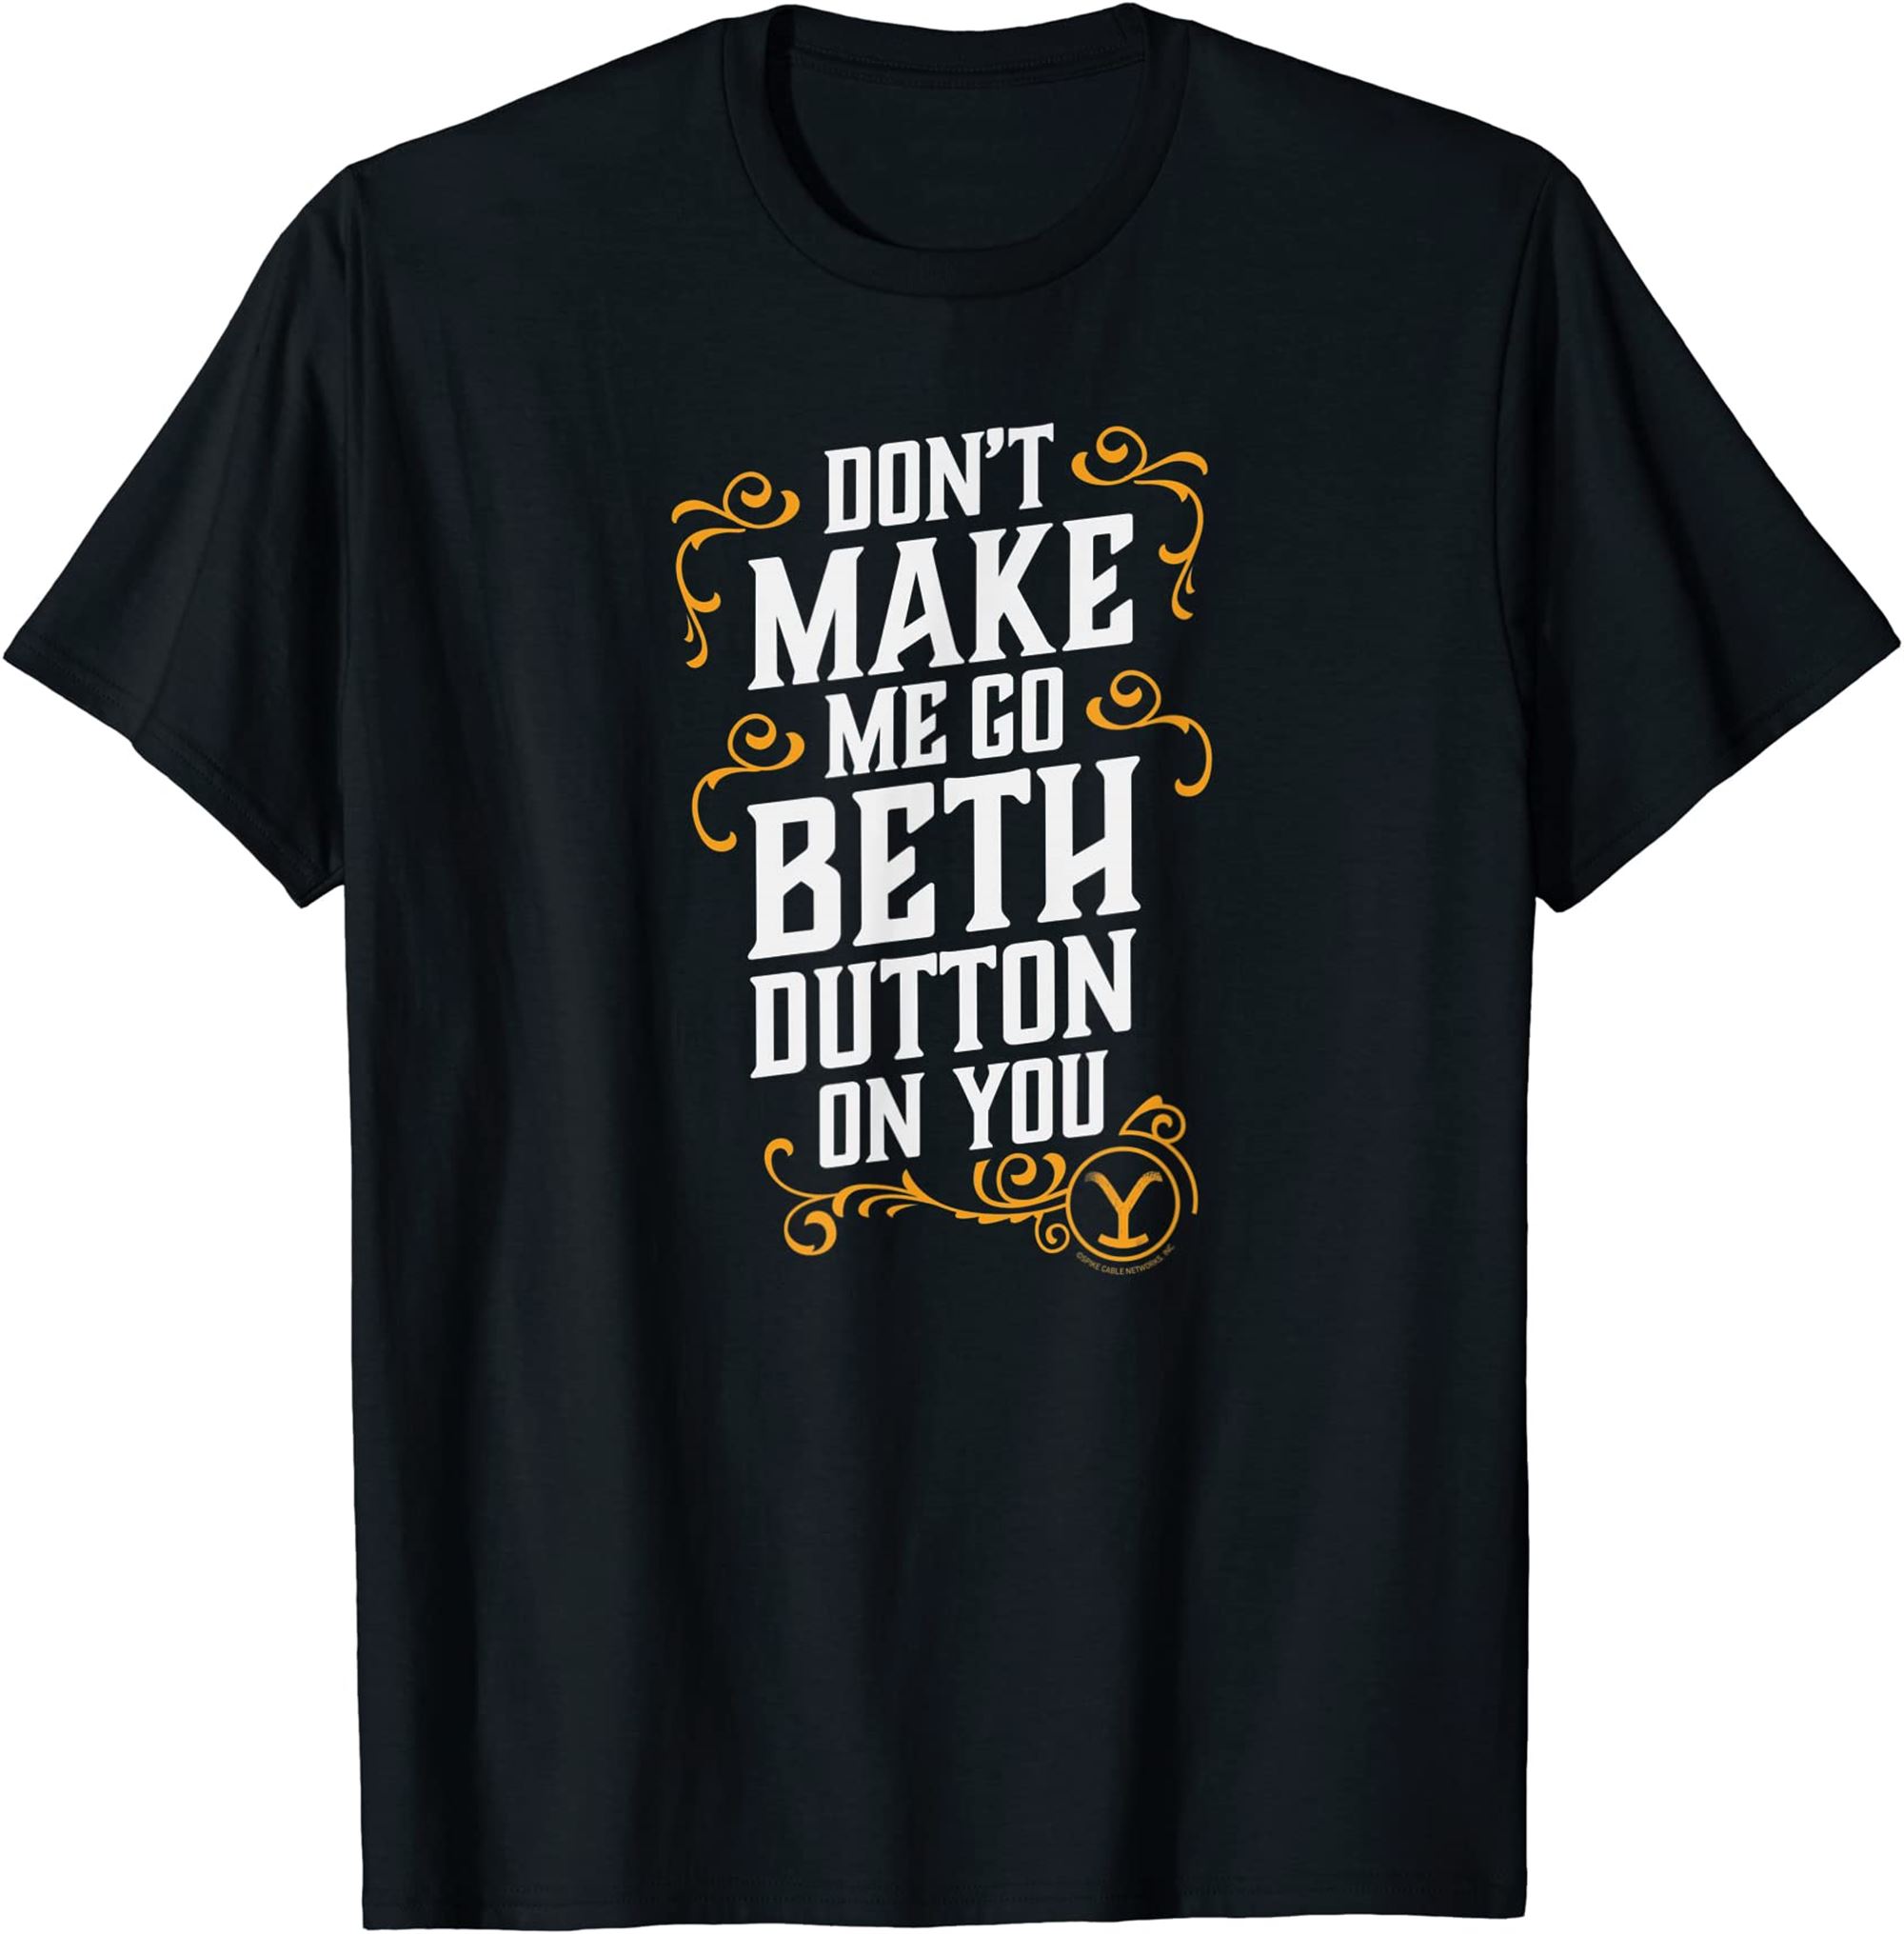 Dont Make Me Go Beth Dutton On You T-shirt Size Up To 5xl